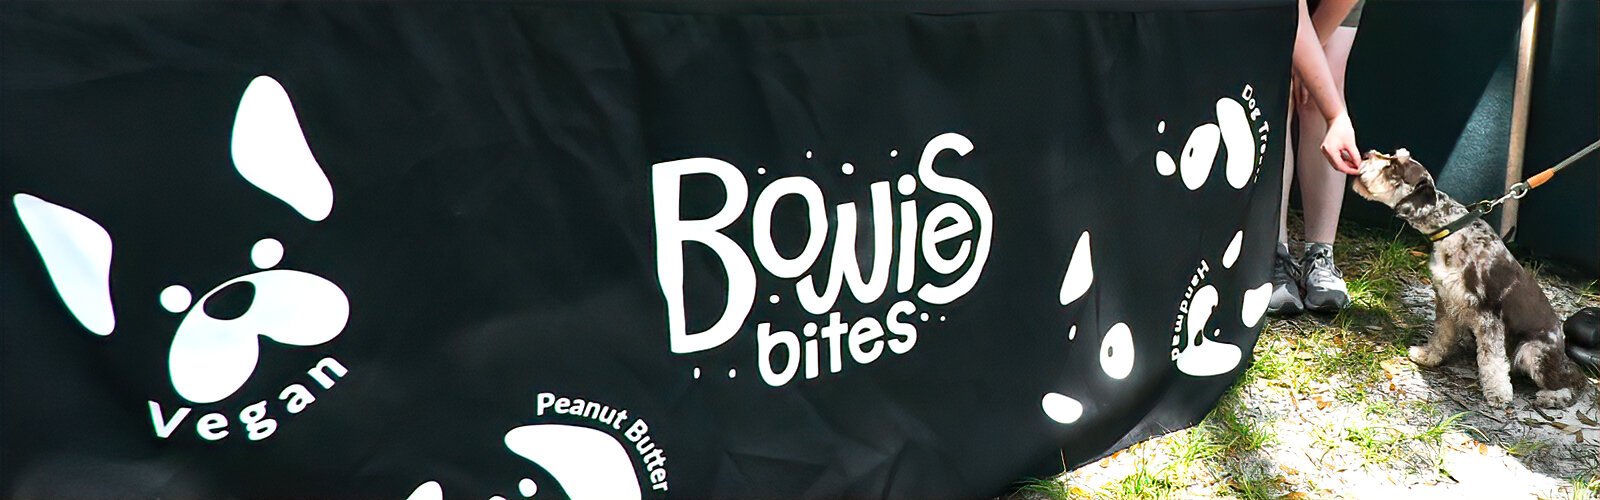 A lucky pooch gets a healthy treat from Bowie’s Bites, which specializes in dog treats made with all-natural organic ingredients and free of preservatives or chemicals.